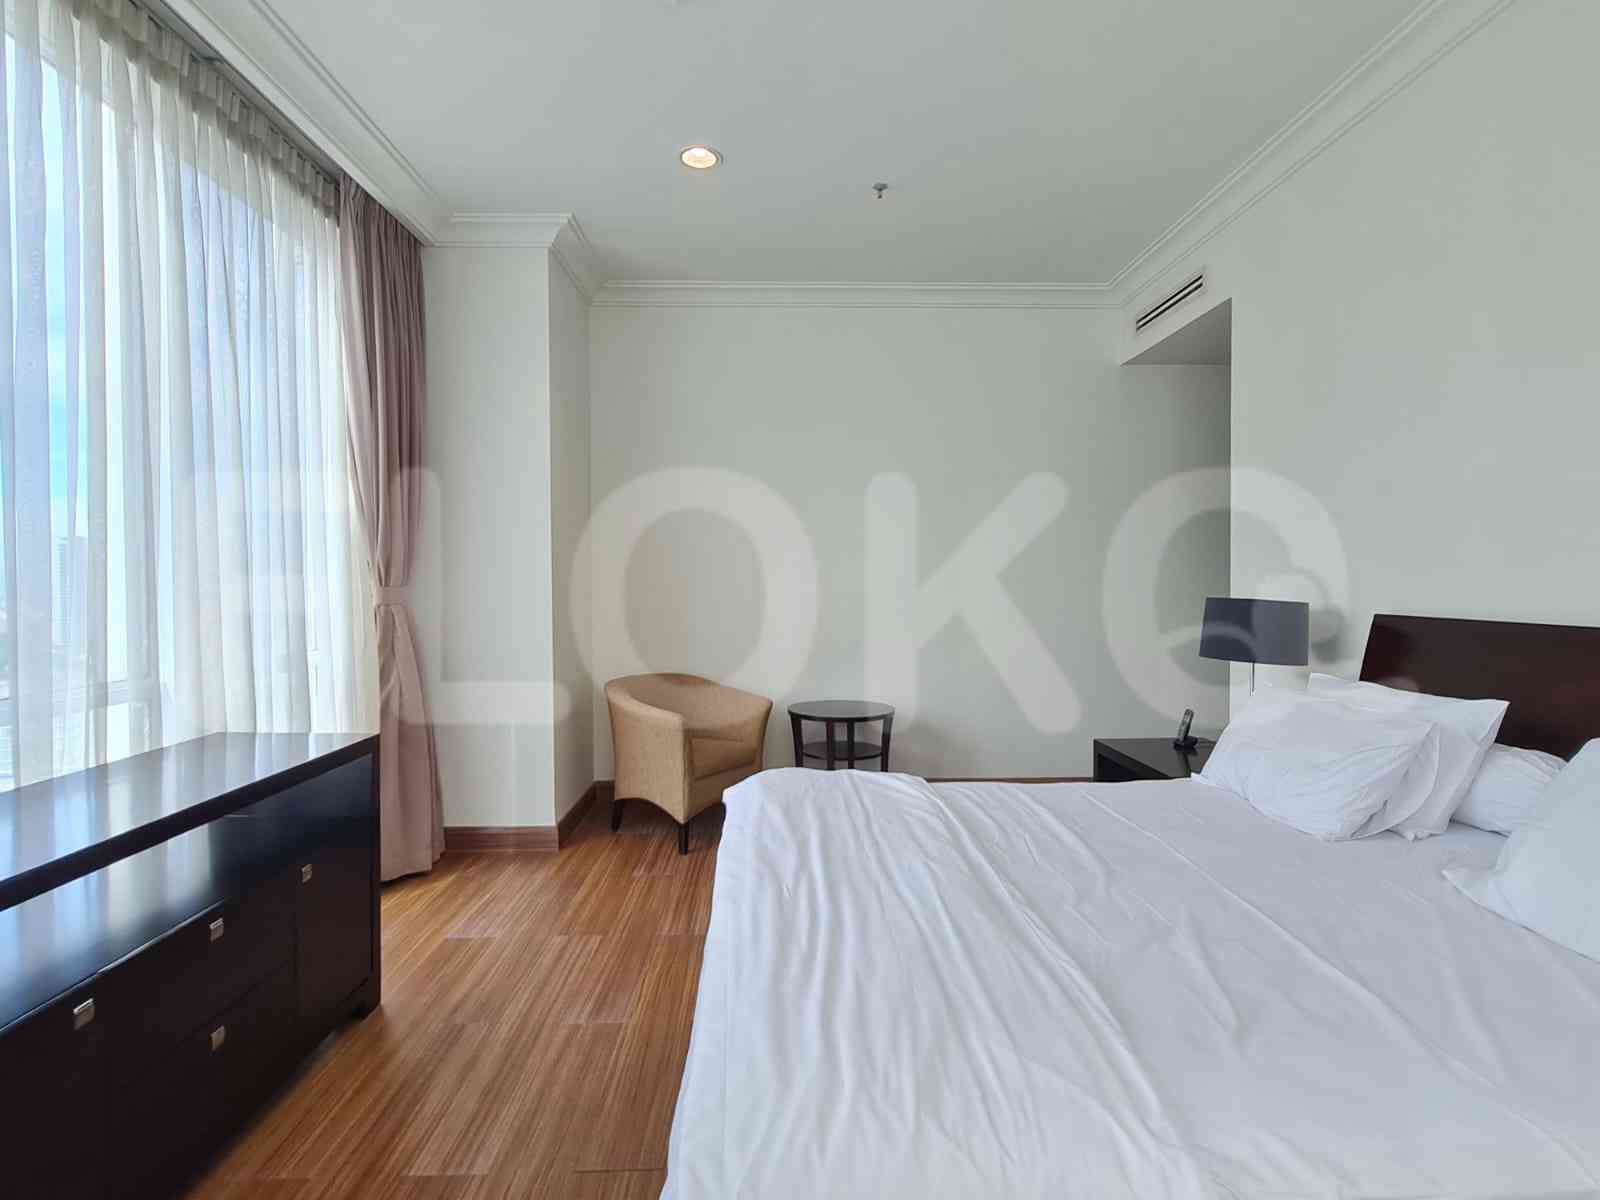 3 Bedroom on 23rd Floor for Rent in Pakubuwono View - fga8fc 3